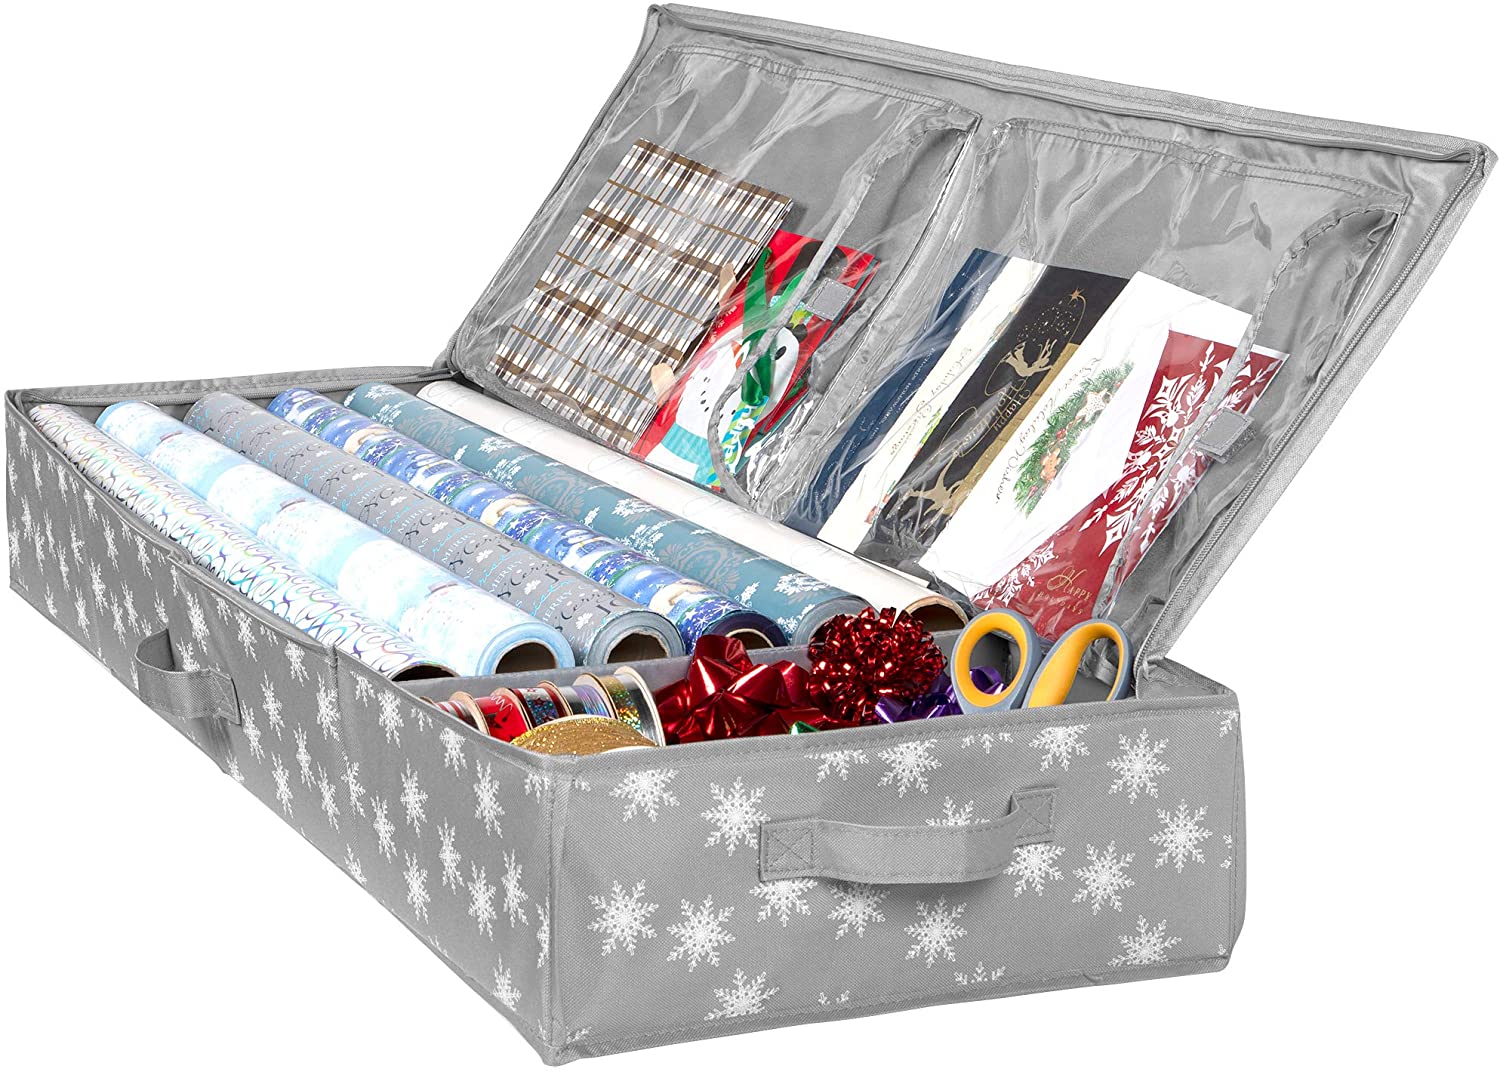 Hold N' Storage Christmas Storage Wrapping Paper Organizer  and Under Bed Storage Container  600D Material - image 1 of 8